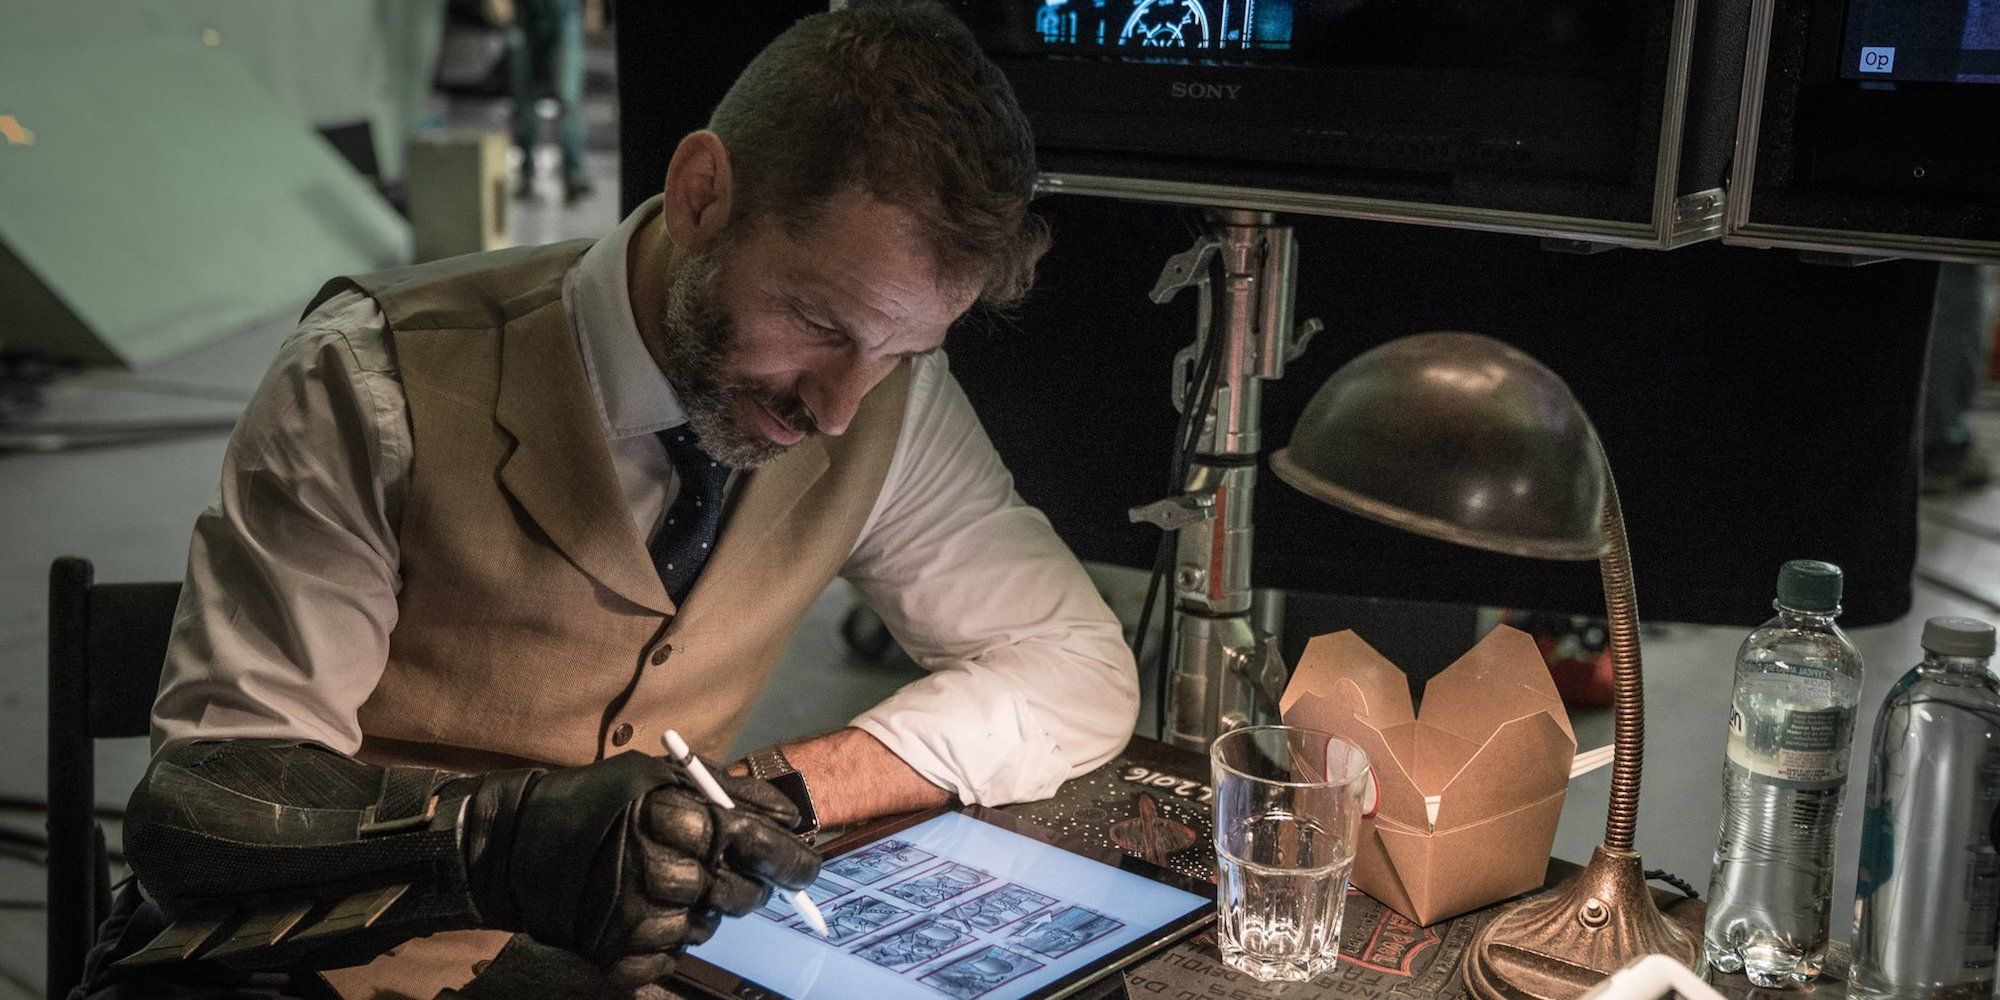 Zack Snyder working on Deathstroke storyboards for Justice League movie